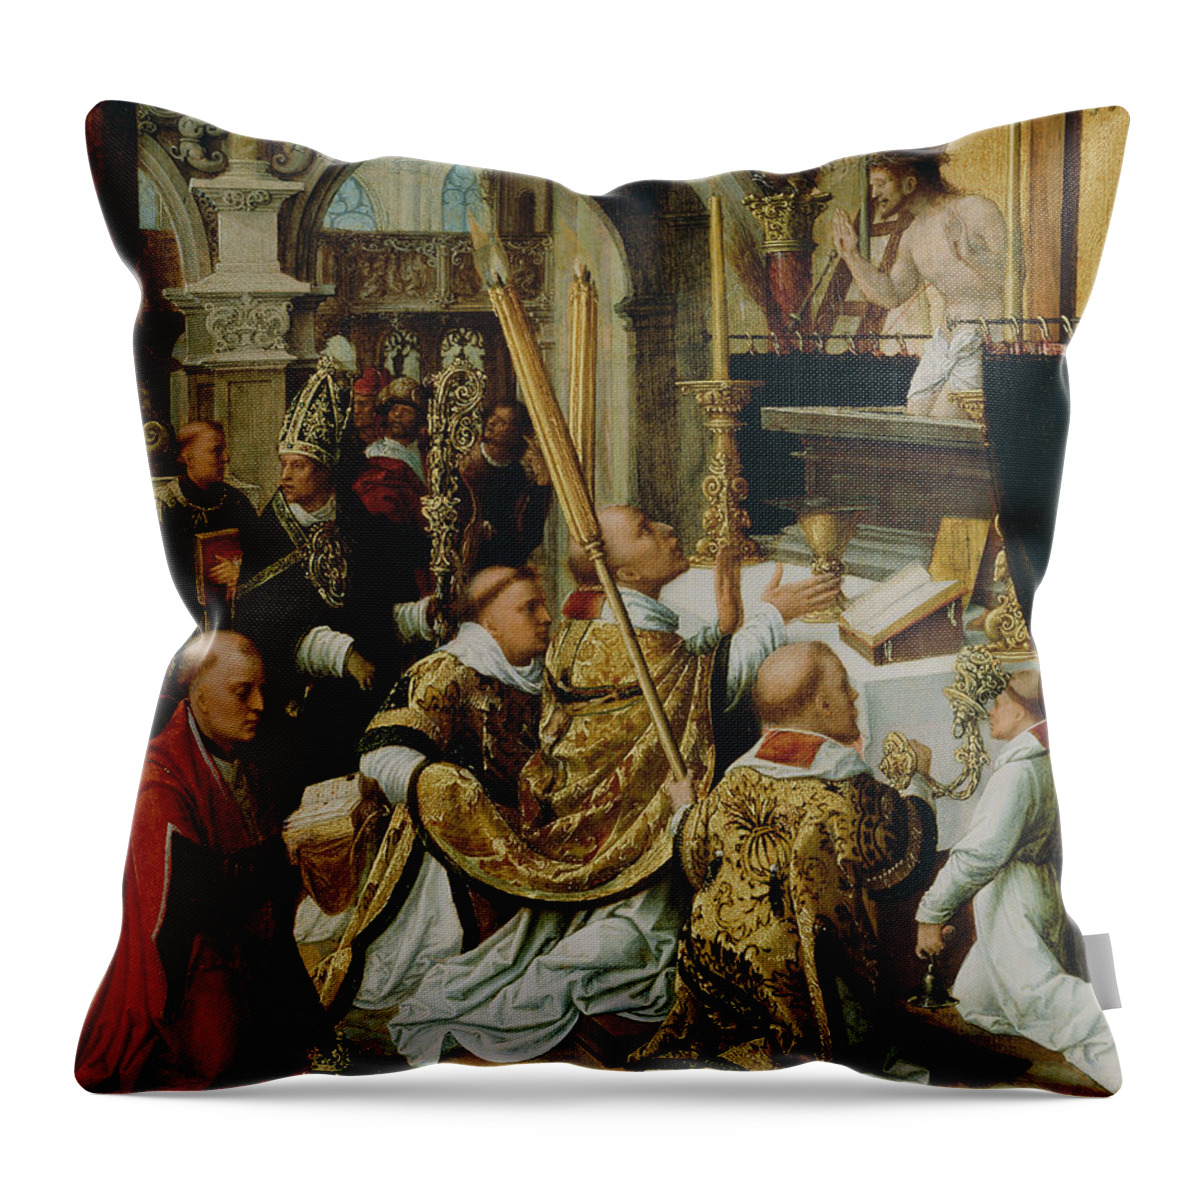 16th Century Art Throw Pillow featuring the painting The Mass of Saint Gregory the Great by Adriaen Isenbrandt